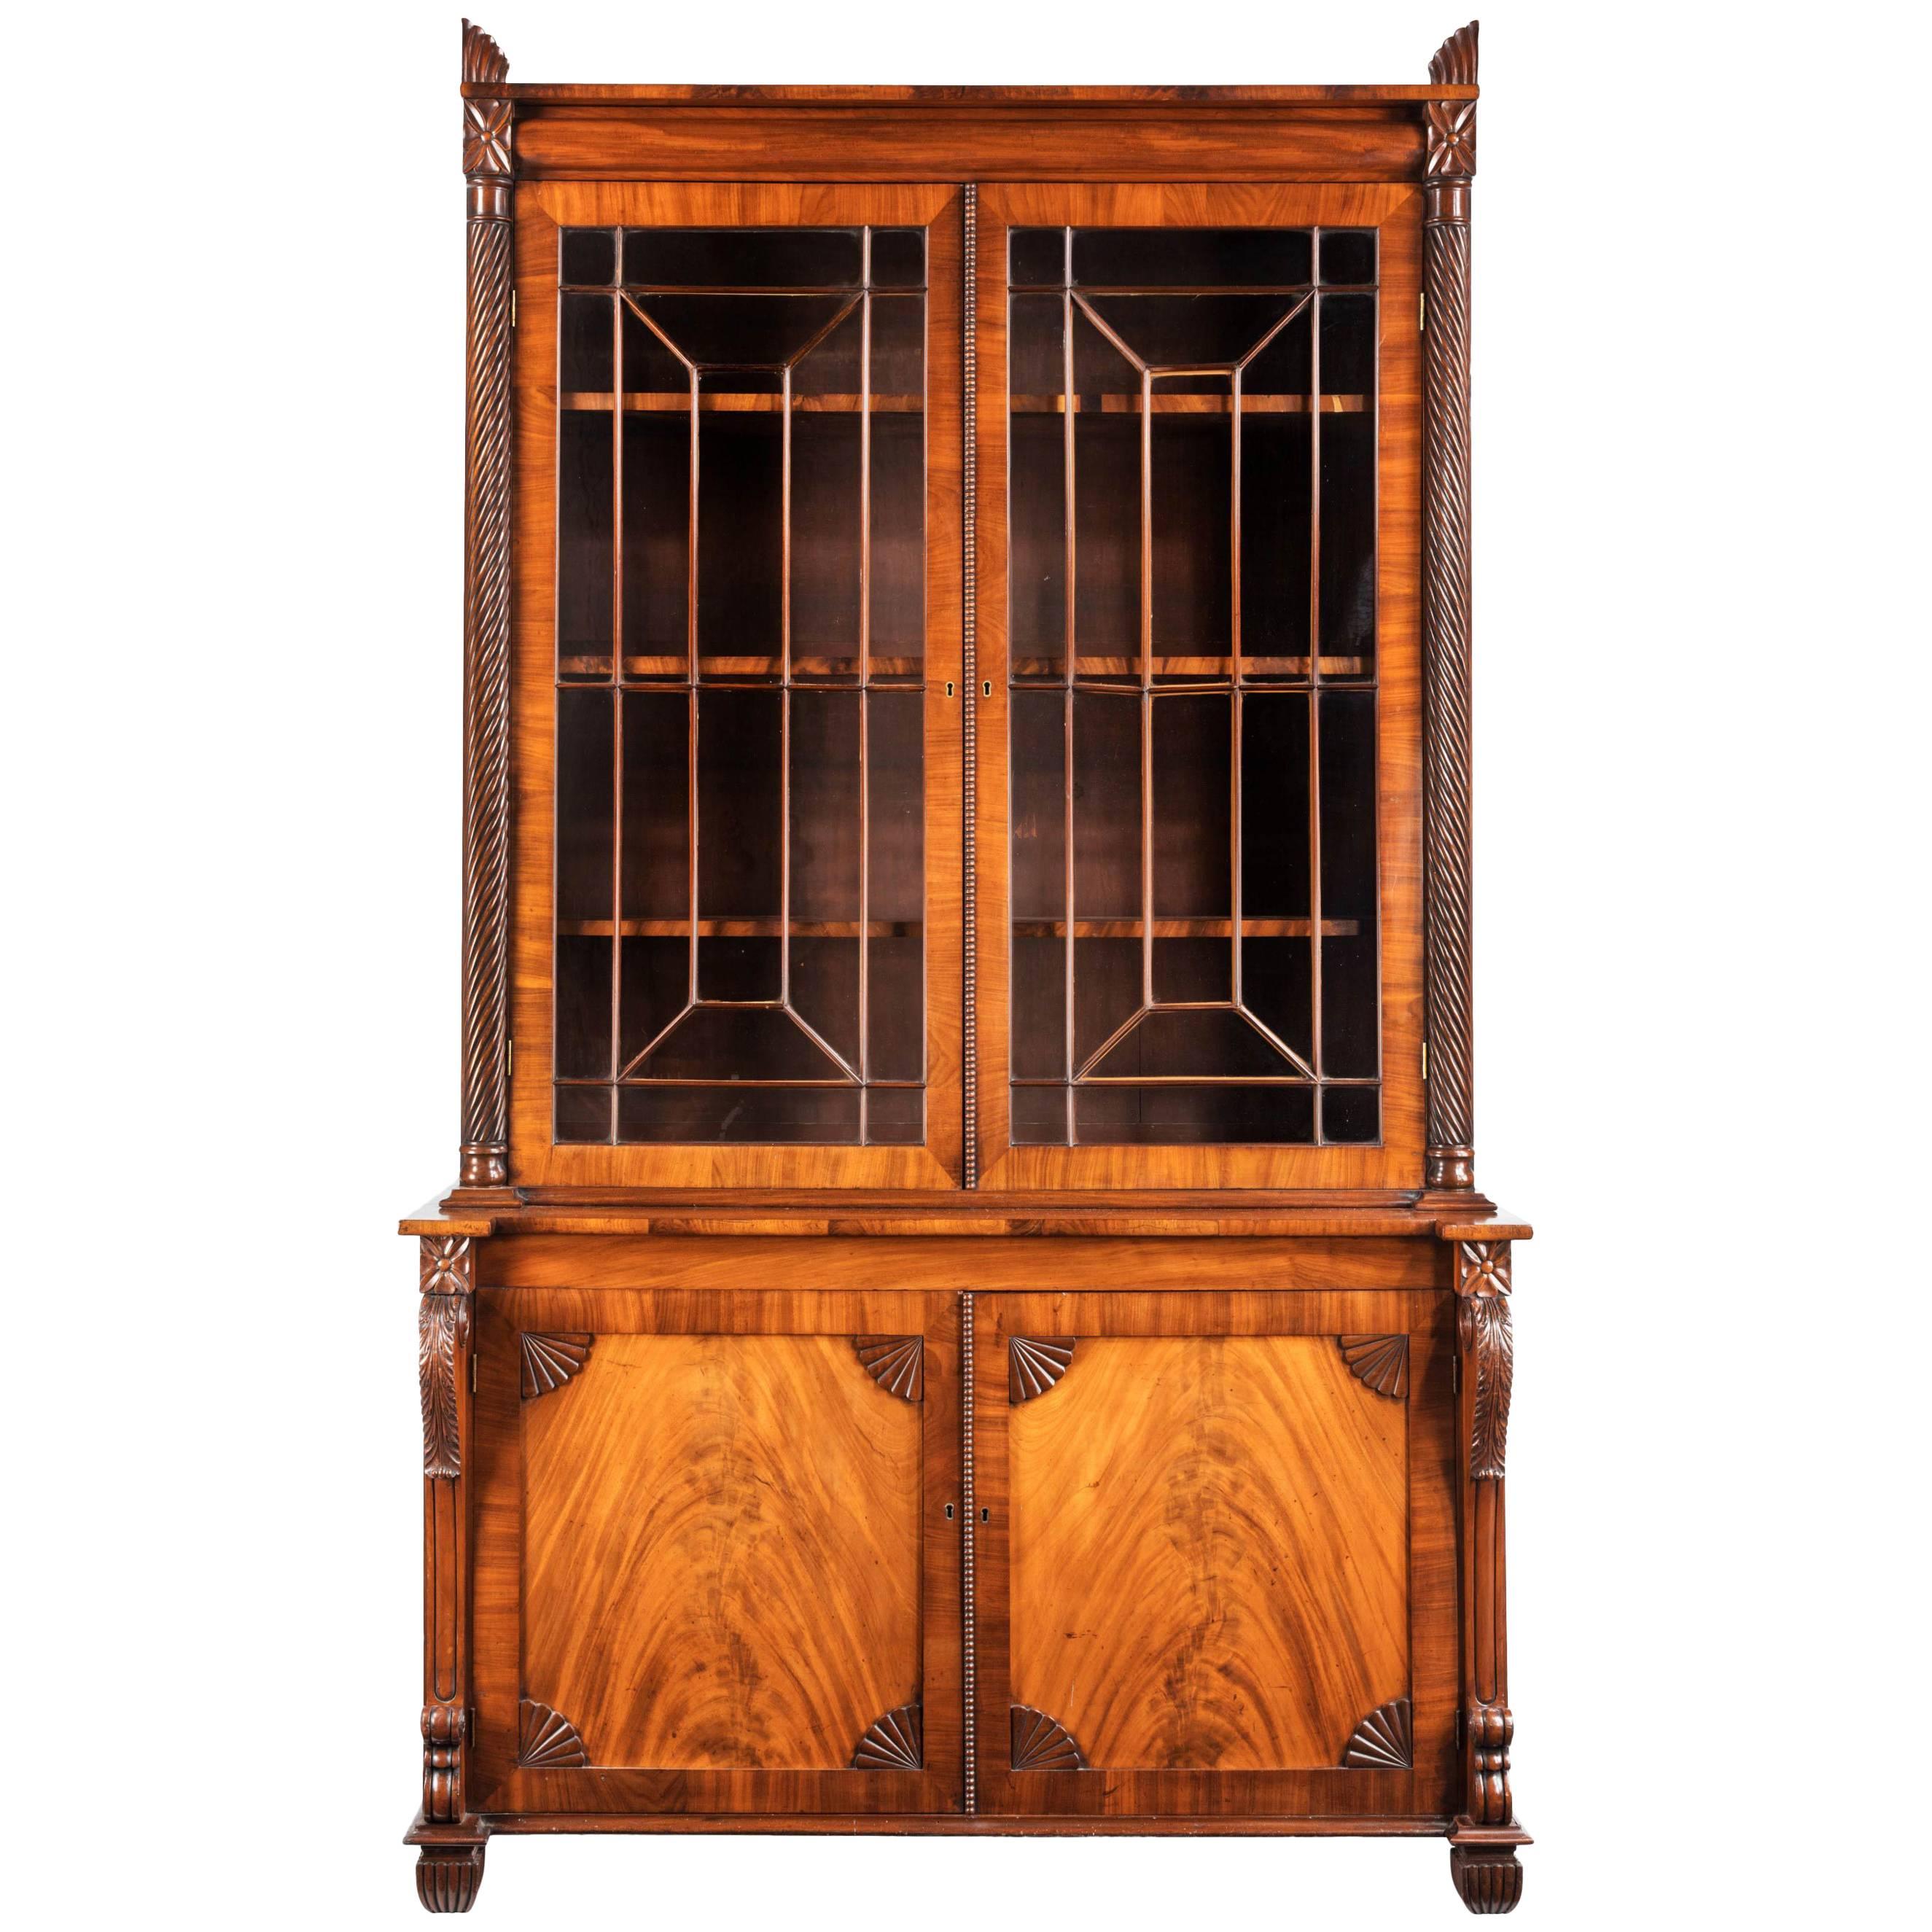 Regency Period Mahogany Bookcase with Matching Flared Panels to the Bottom Doors